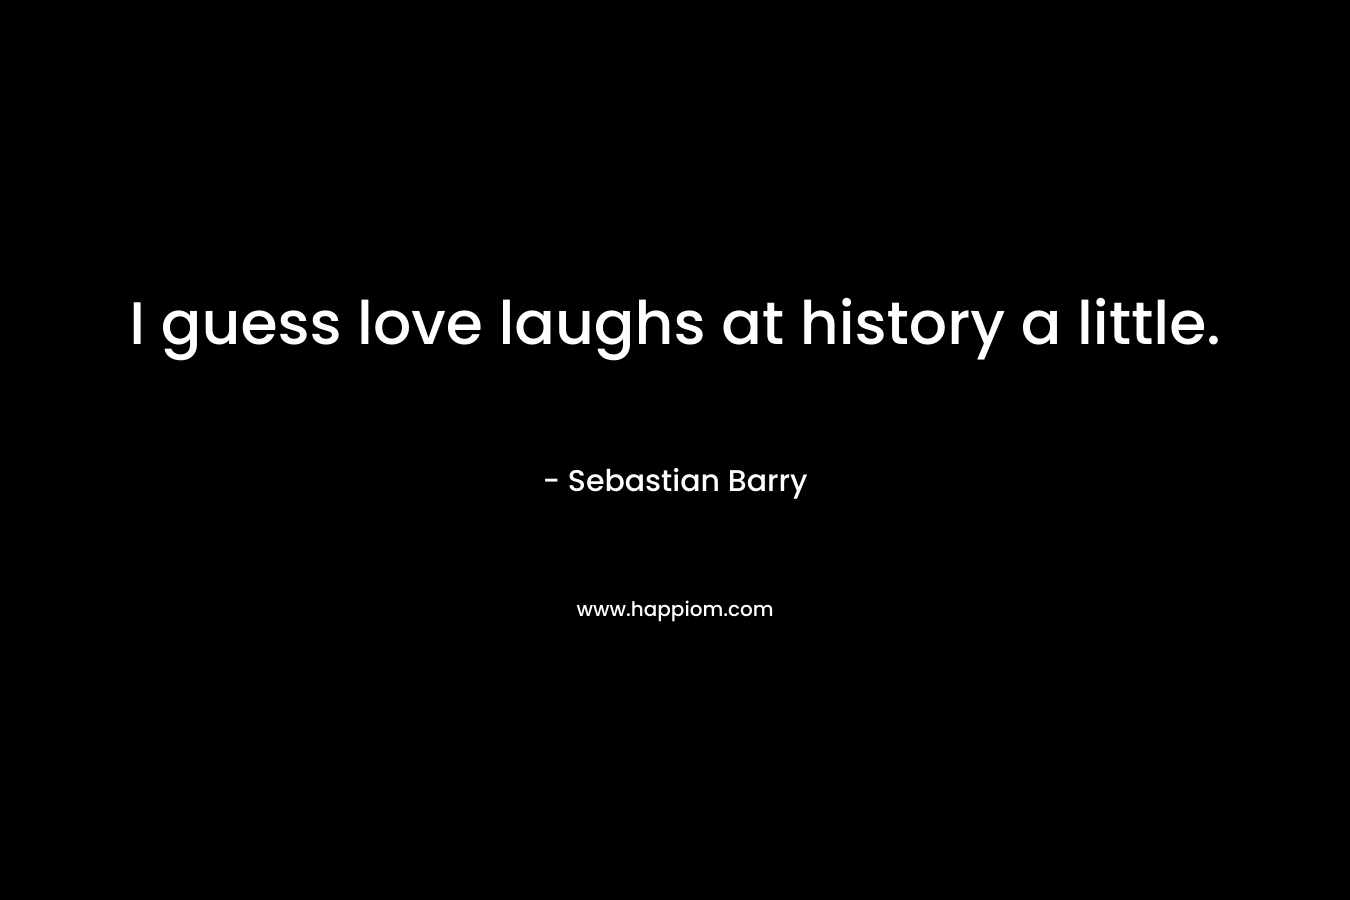 I guess love laughs at history a little. – Sebastian Barry